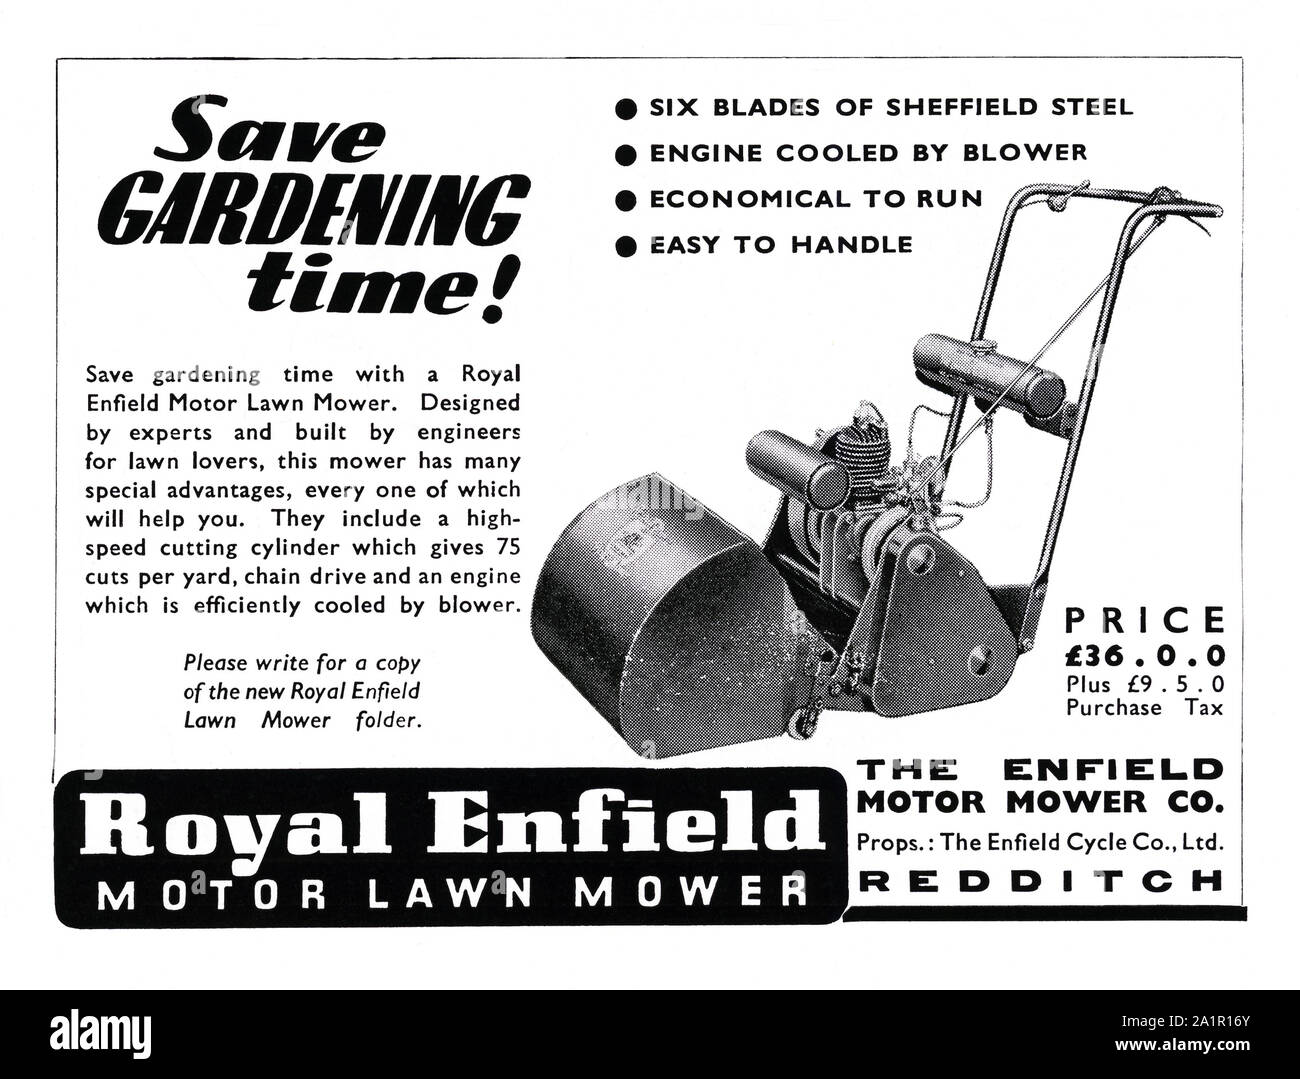 Advert for Royal Enfield motor mower, 1951, emphasising its time-saving ability in the garden. Royal Enfield was a brand name under which The Enfield Cycle Company Limited of Redditch, Worcestershire made and sold motorcycles, bicycles, lawnmowers and stationary engines. Stock Photo